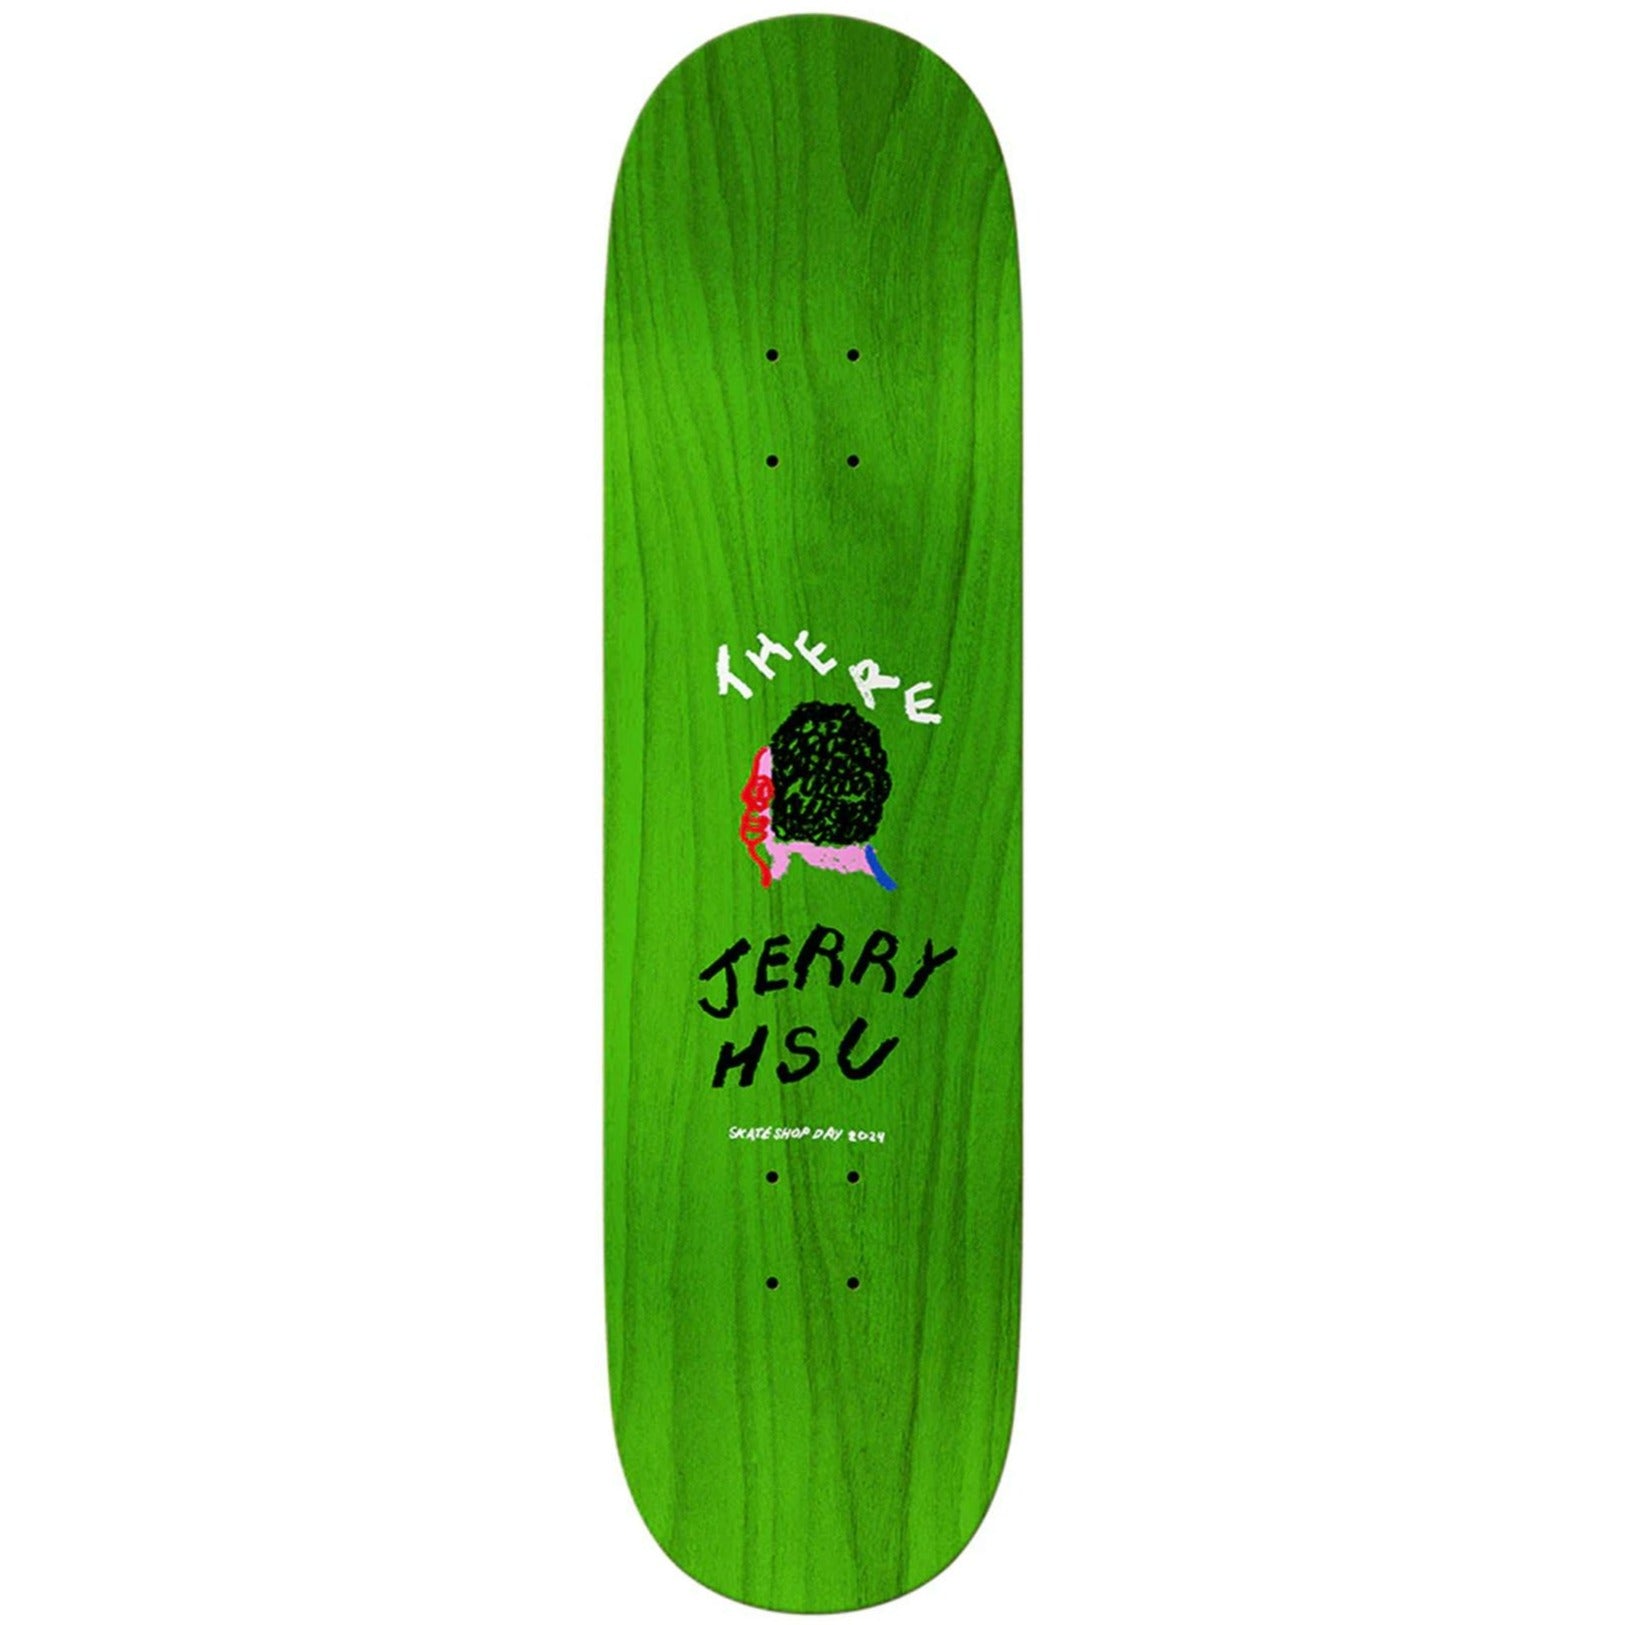 There Jerry Hsu Guest SSD 24 Deck 8.25